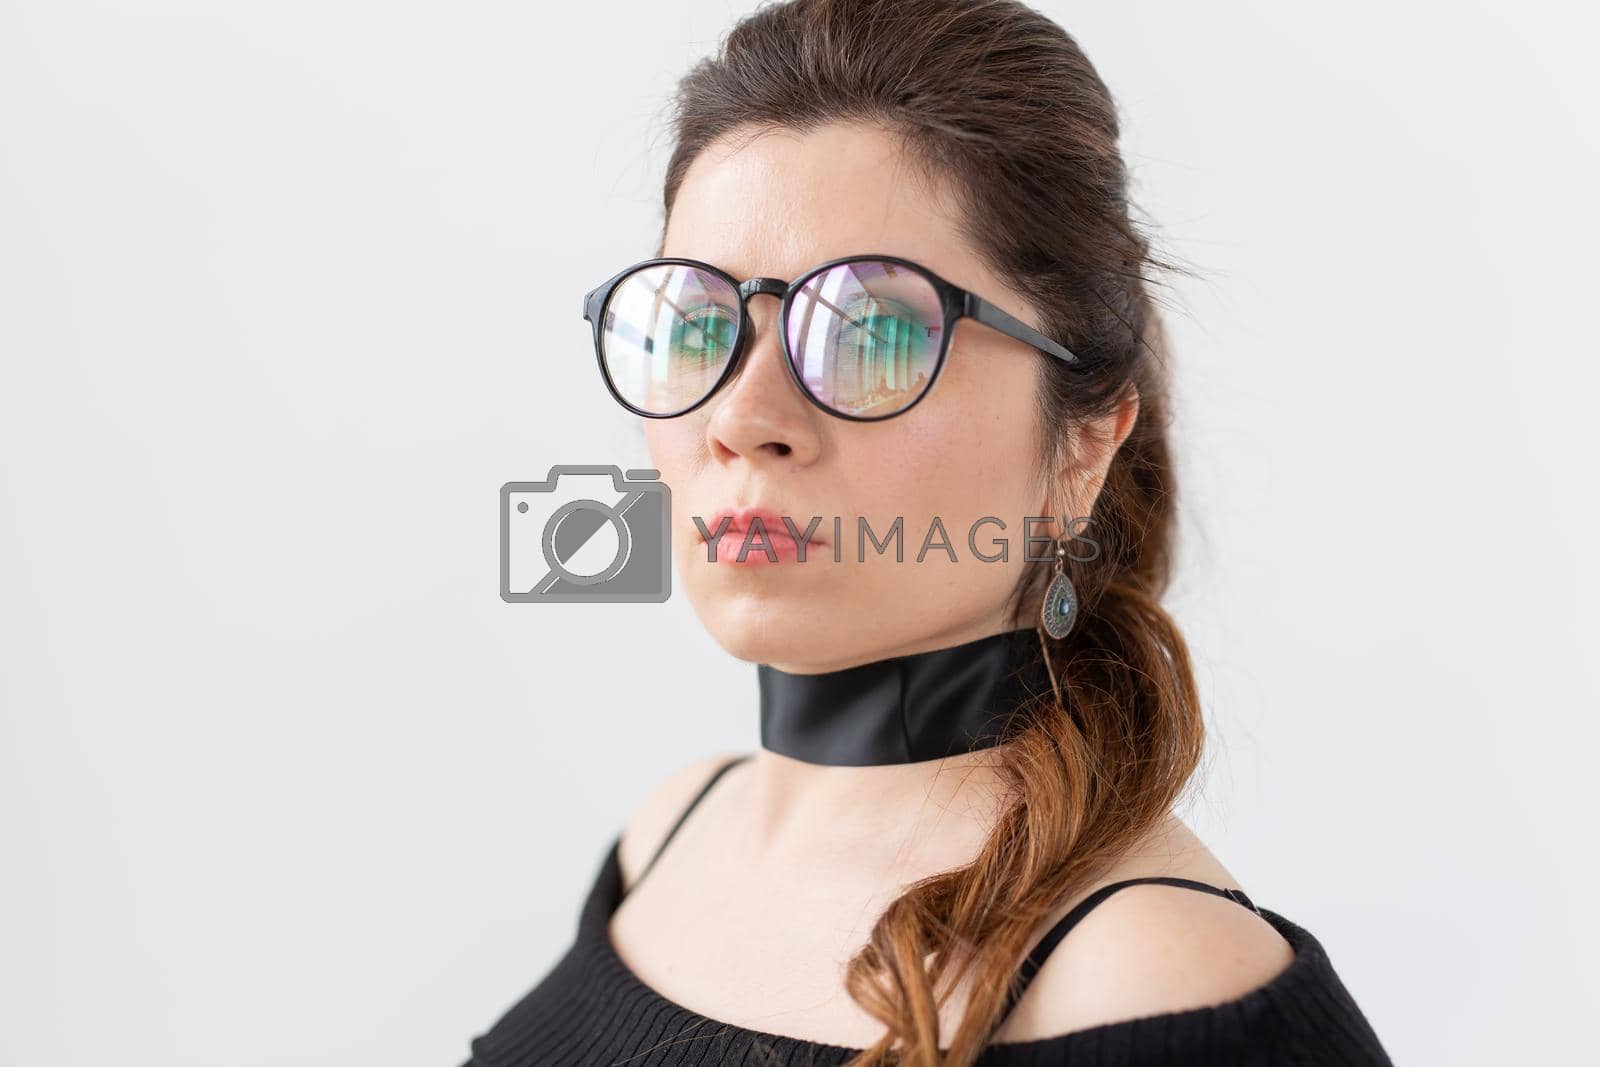 Royalty free image of Portrait, fashion, style and people concept - woman in glasses and choker on white background by Satura86